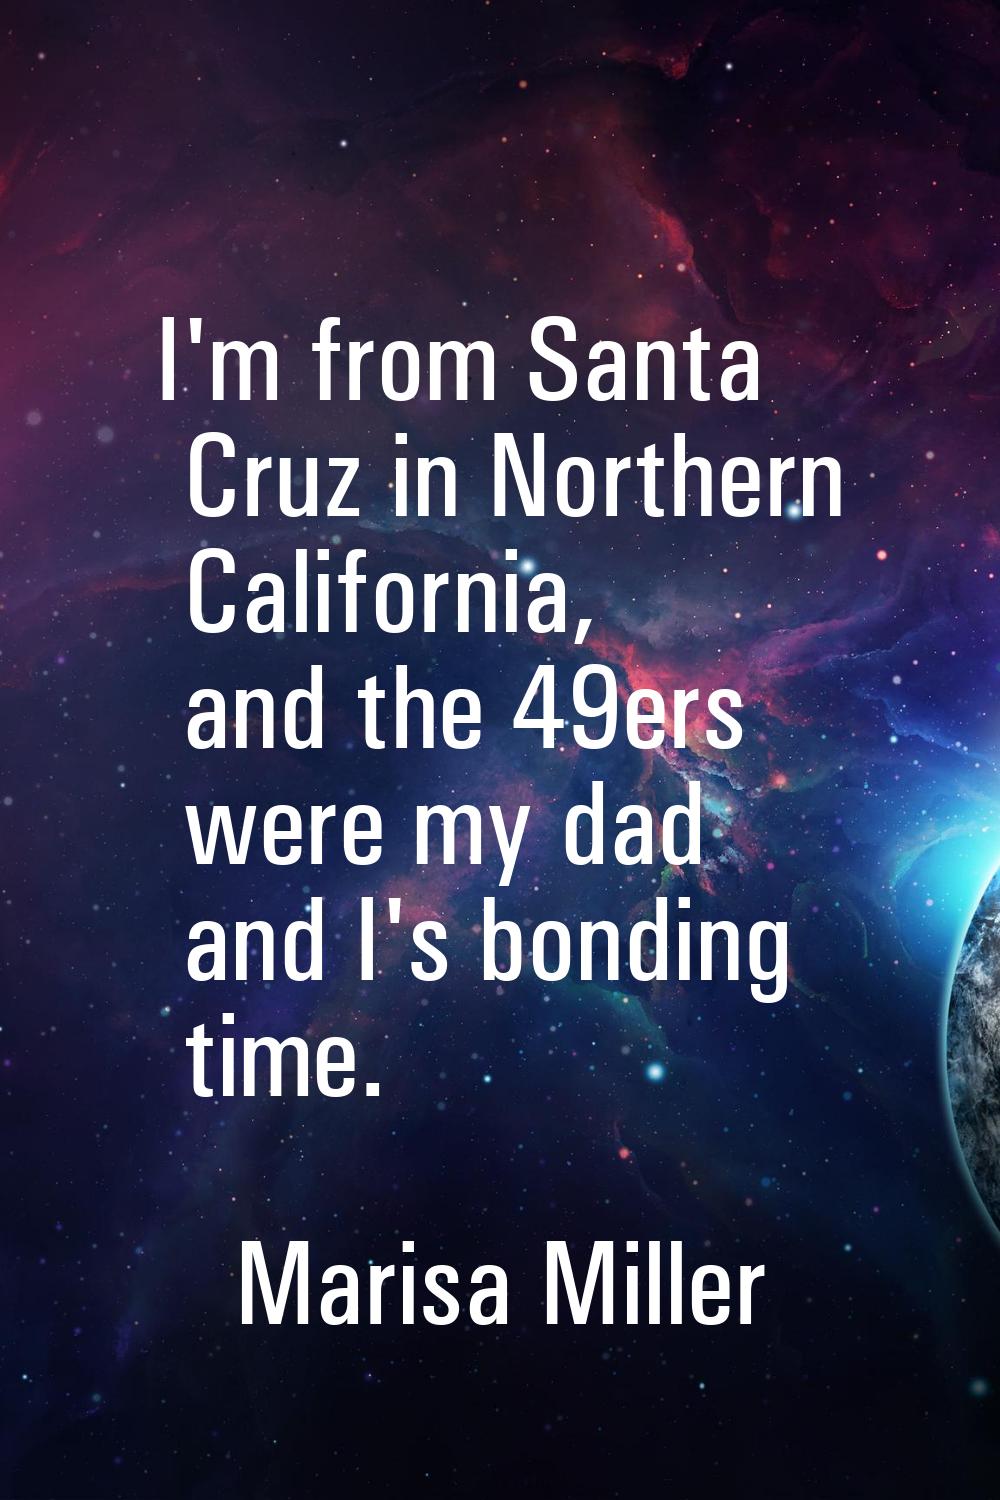 I'm from Santa Cruz in Northern California, and the 49ers were my dad and I's bonding time.